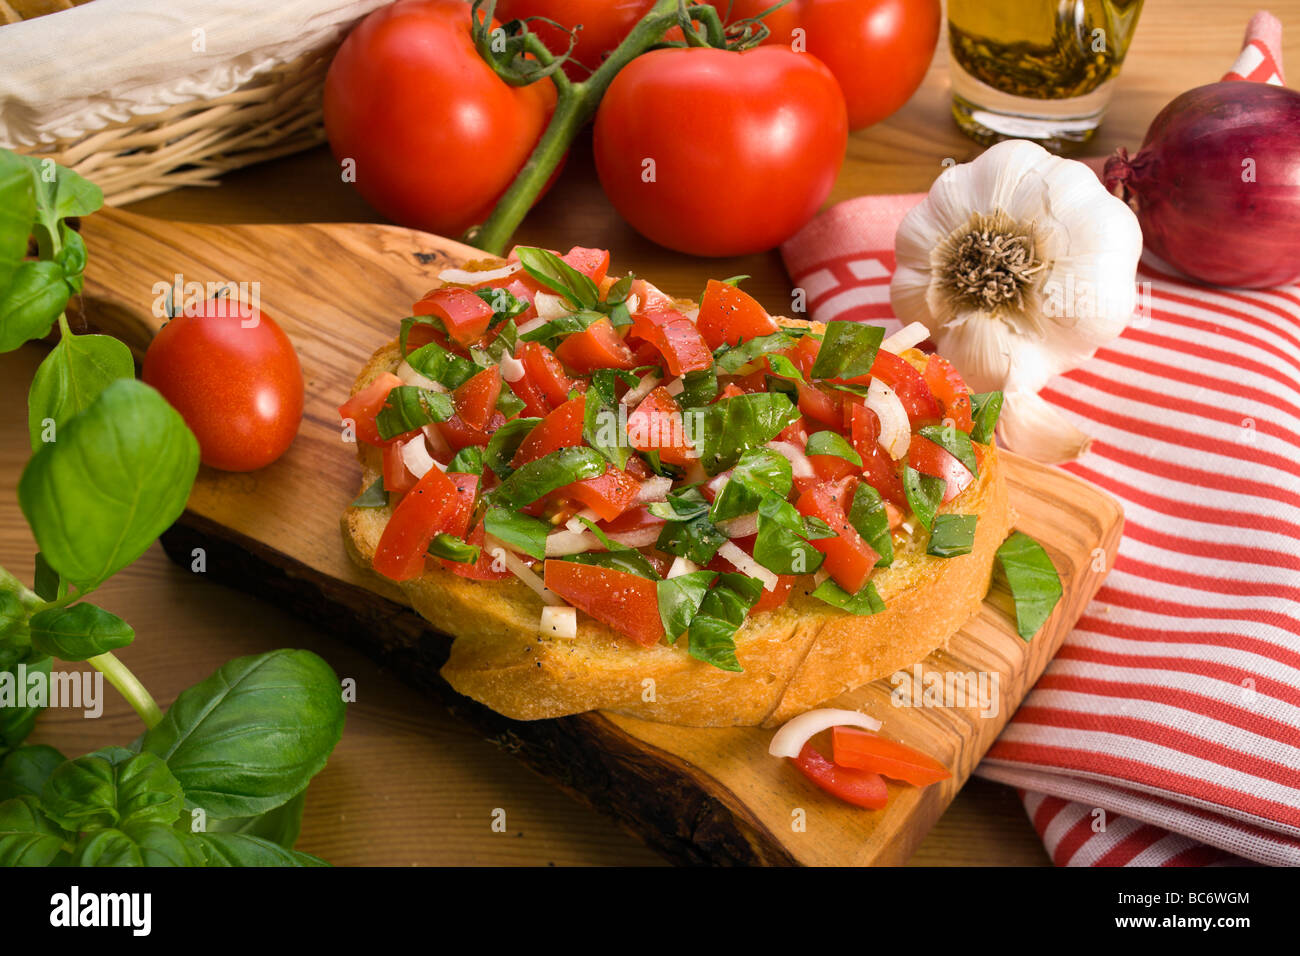 italian bruschetta bread served on olive wood plank, decorated with various ingredients Stock Photo